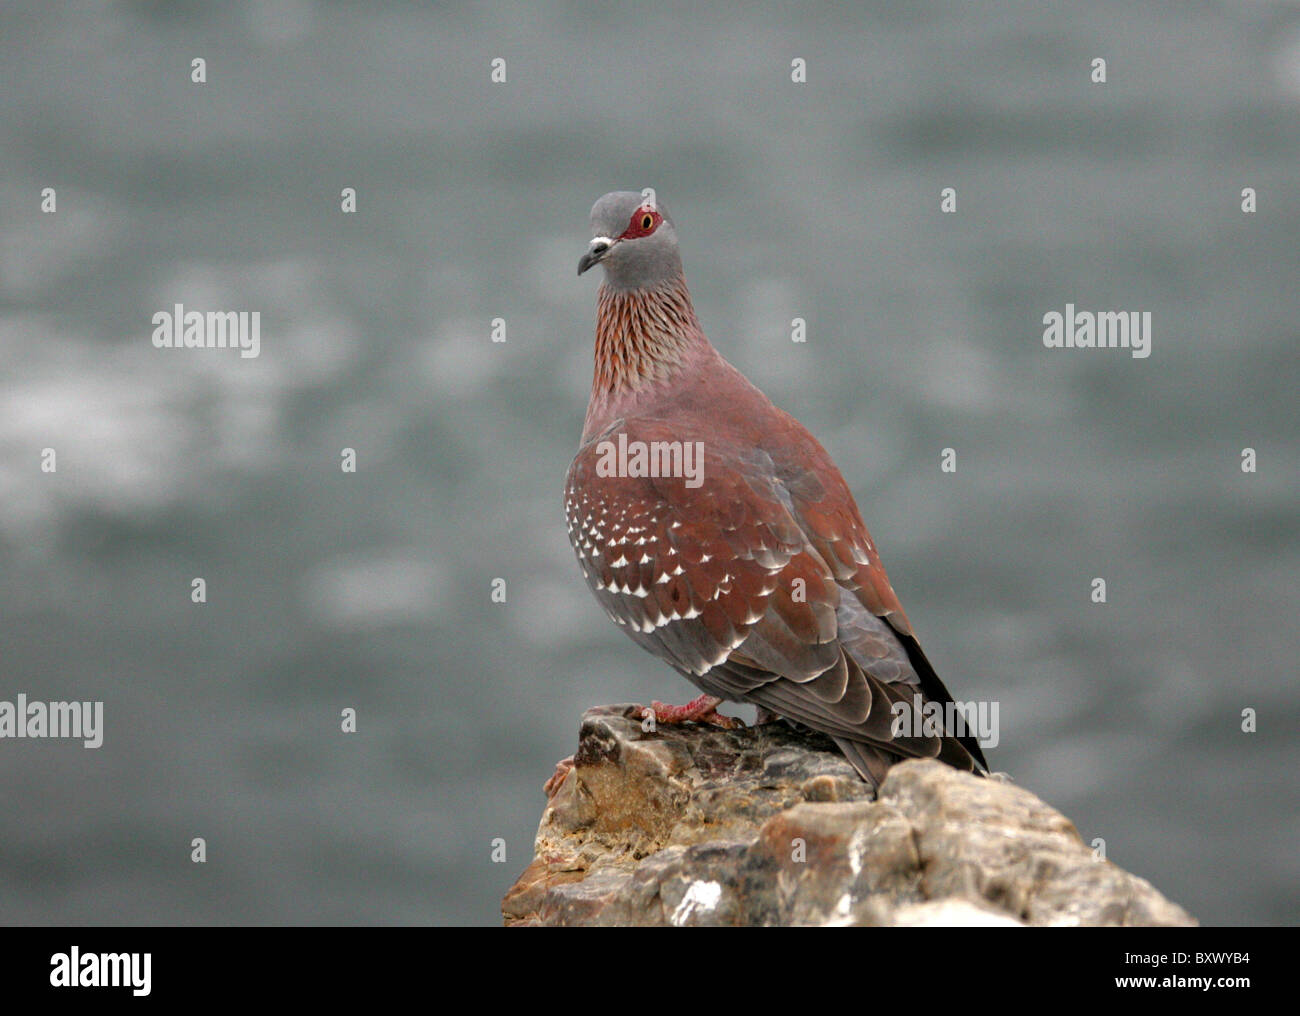 Speckled Pigeon or African Rock Pigeon, Columba guinea, Columbidae. Hermanus, Western Cape, South Africa. Stock Photo